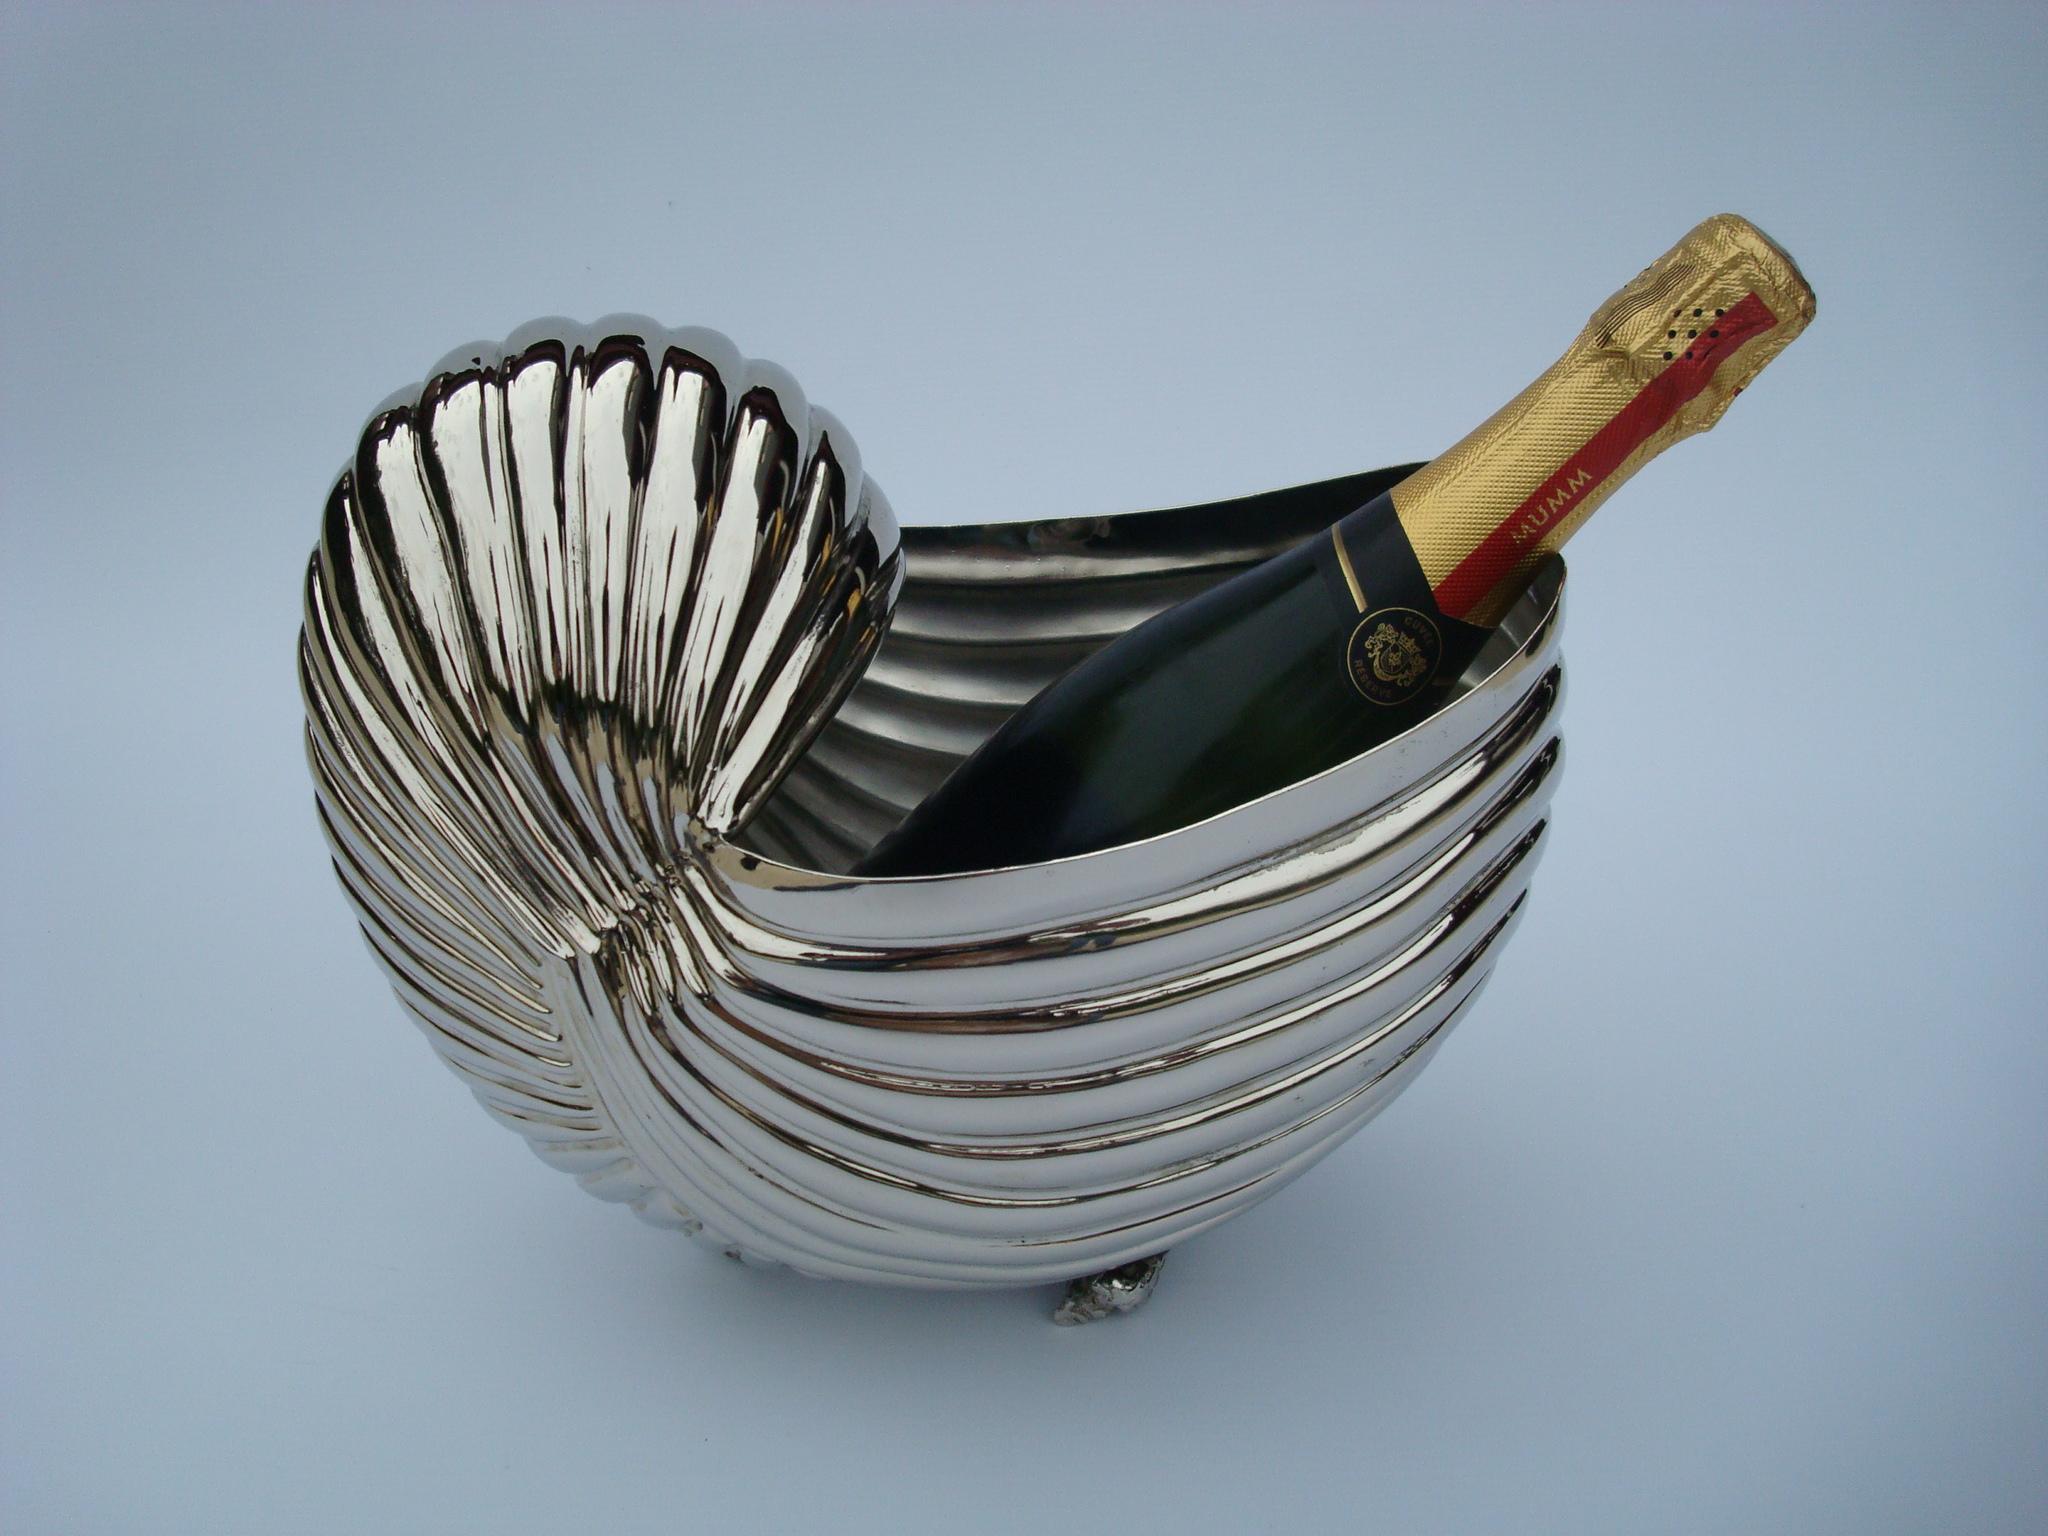 Nautilus sea shell wine / champagne cooler bottle holder
Silvered bucket champagne chiller wine. Ready to chill or party, this glamorous silver finished bucket is ideal for cooling and serving your favorite wine or bubbly.
Marked Sheffield Plate.